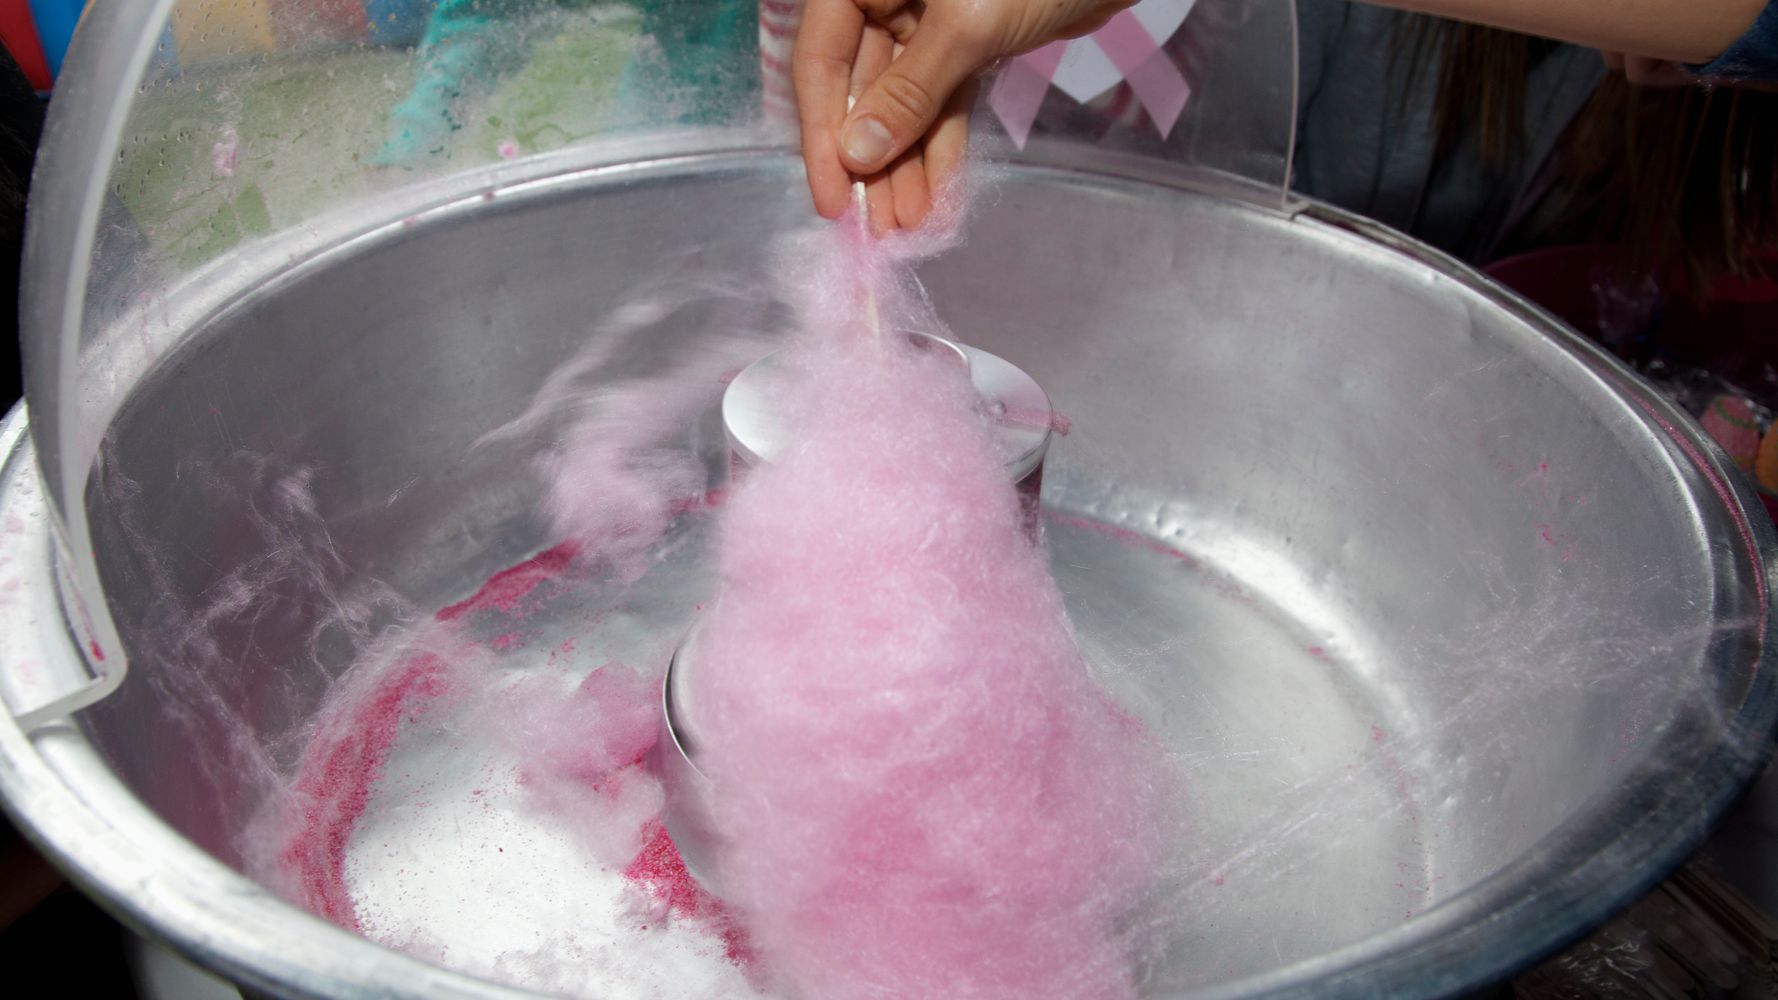 Ironically, A Dentist Helped Popularize Cotton Candy | HuffPost Life